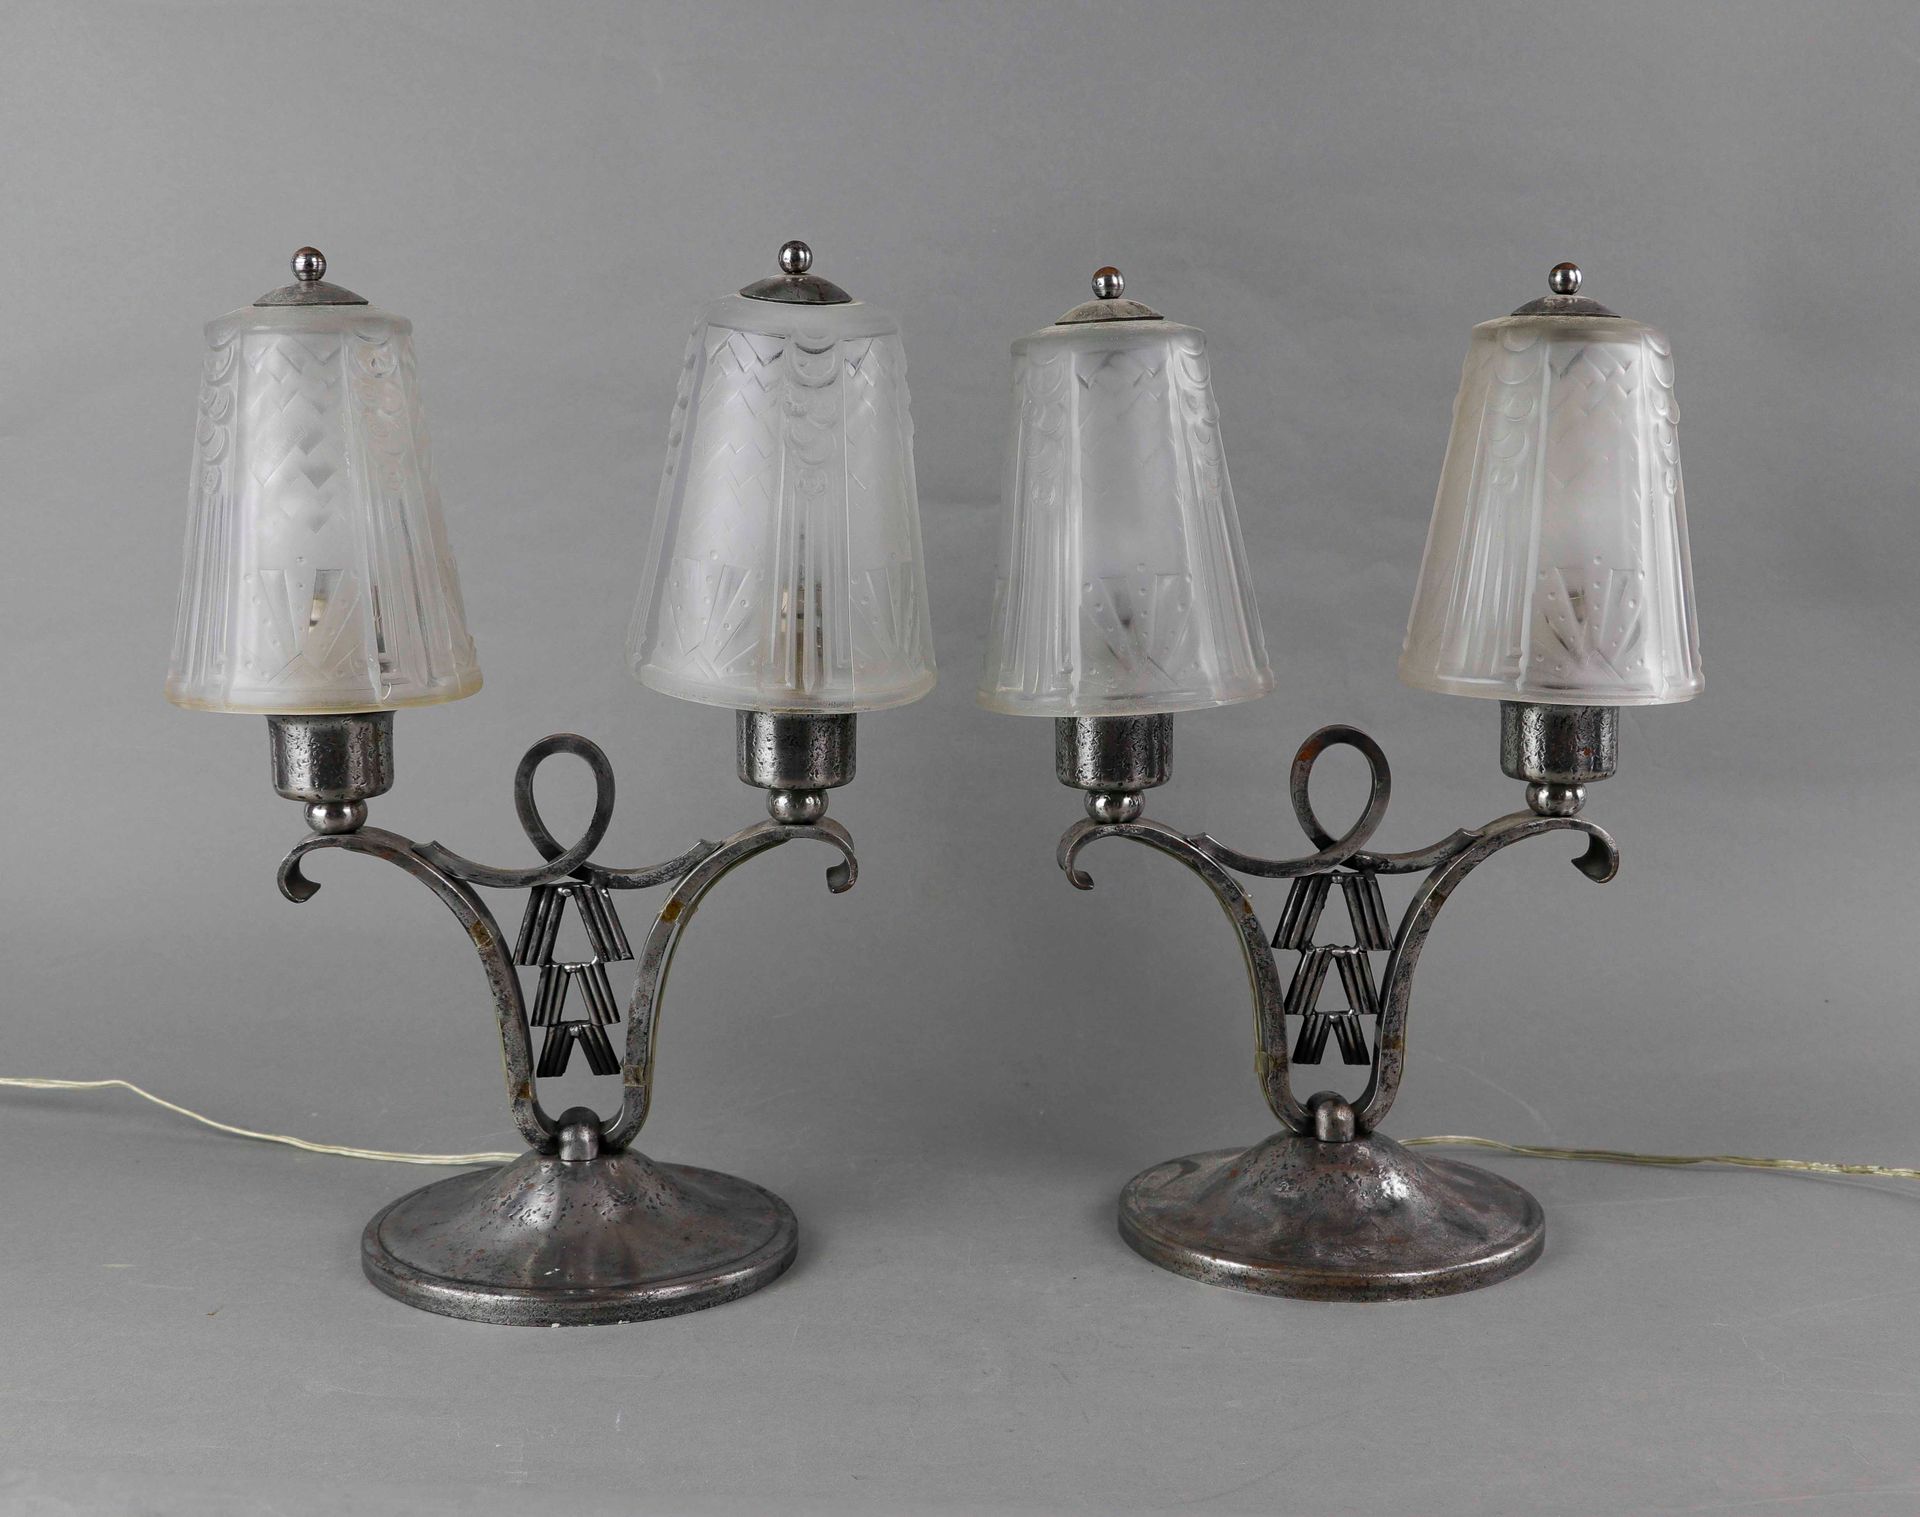 MULLER Frères in Luneville. Pair of bedside lamps with two arms of light with la&hellip;